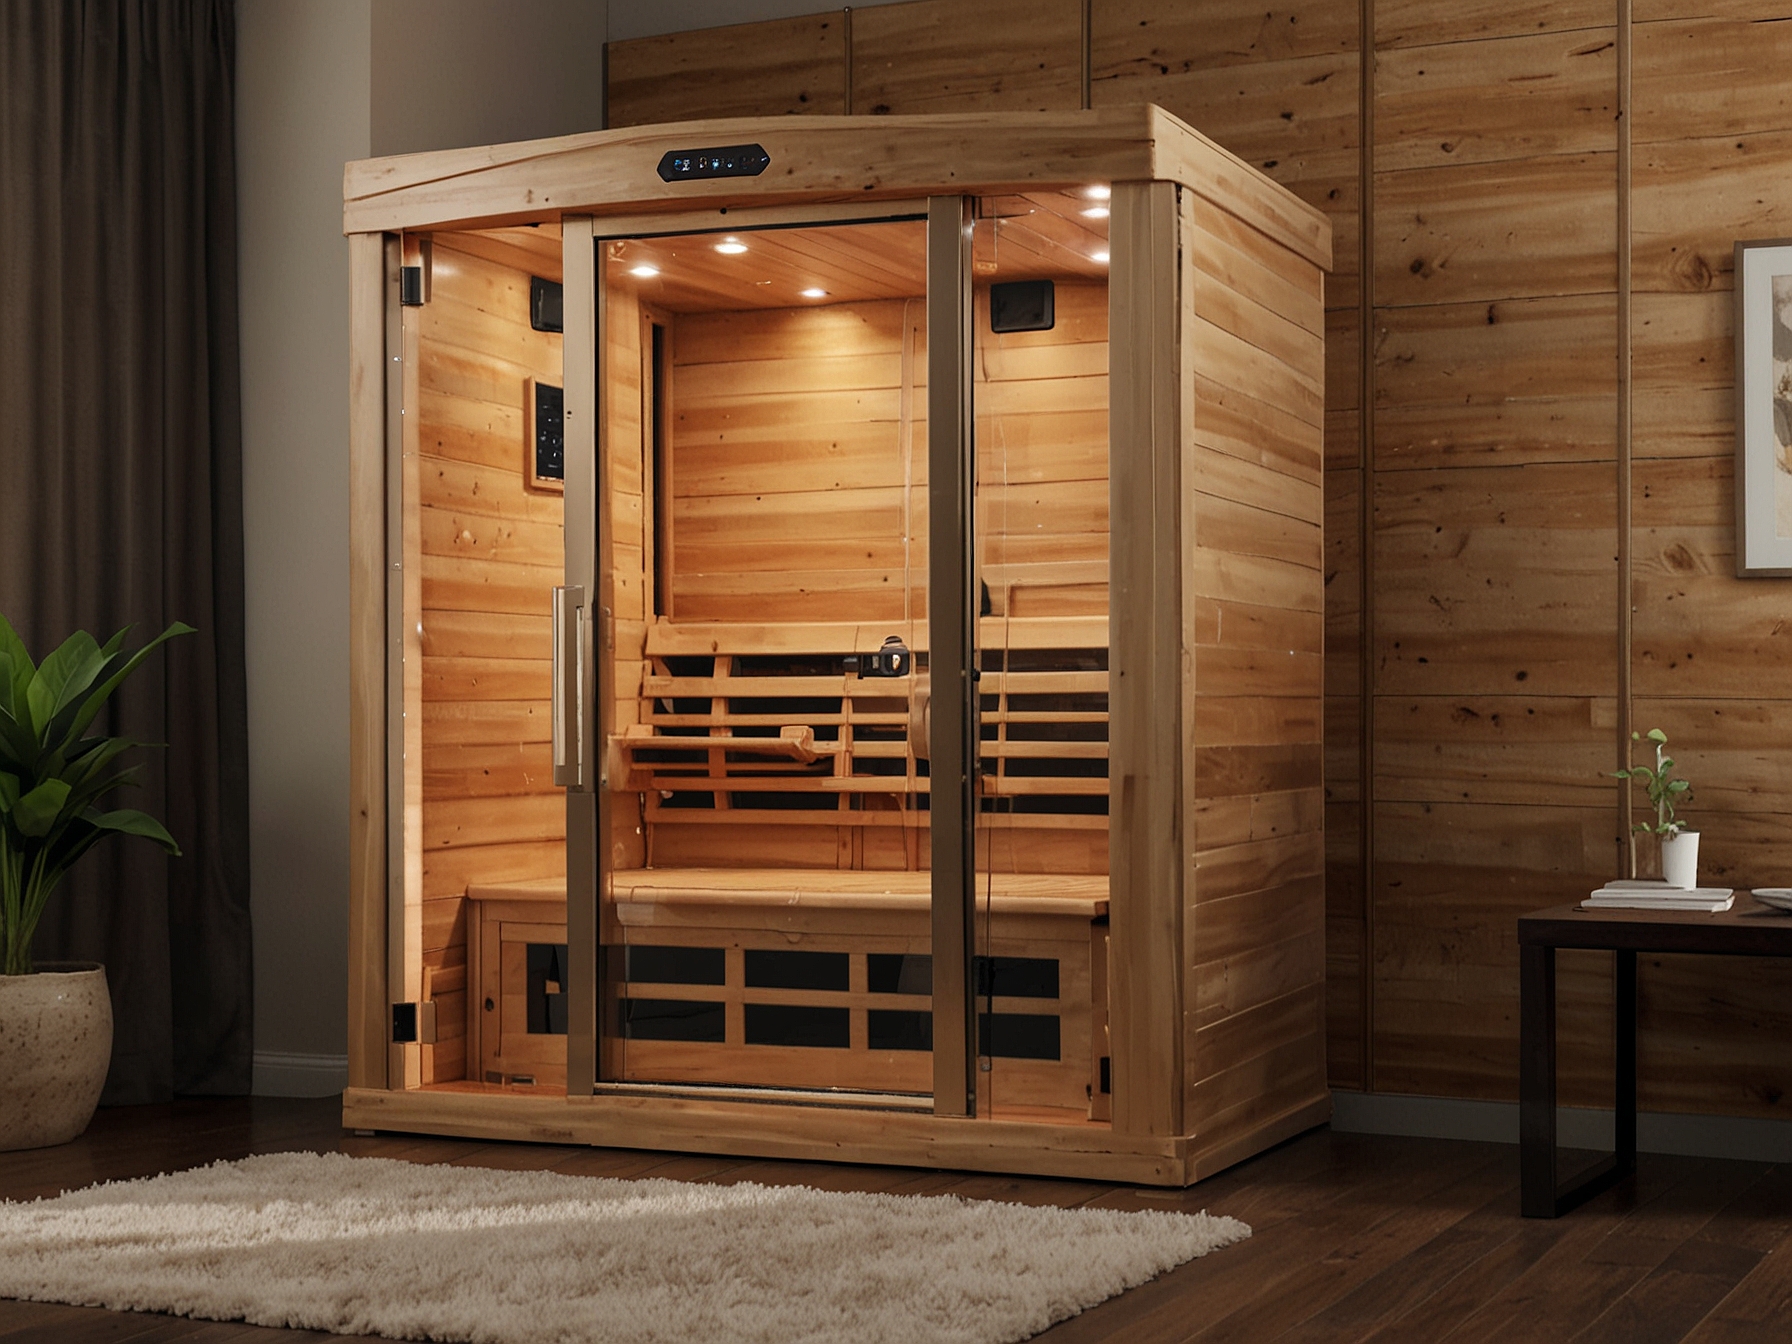 A spacious and luxurious setup of the Clearlight Sanctuary™ Full Spectrum Infrared Sauna in a home, showcasing its eco-certified wood and advanced digital control panel.